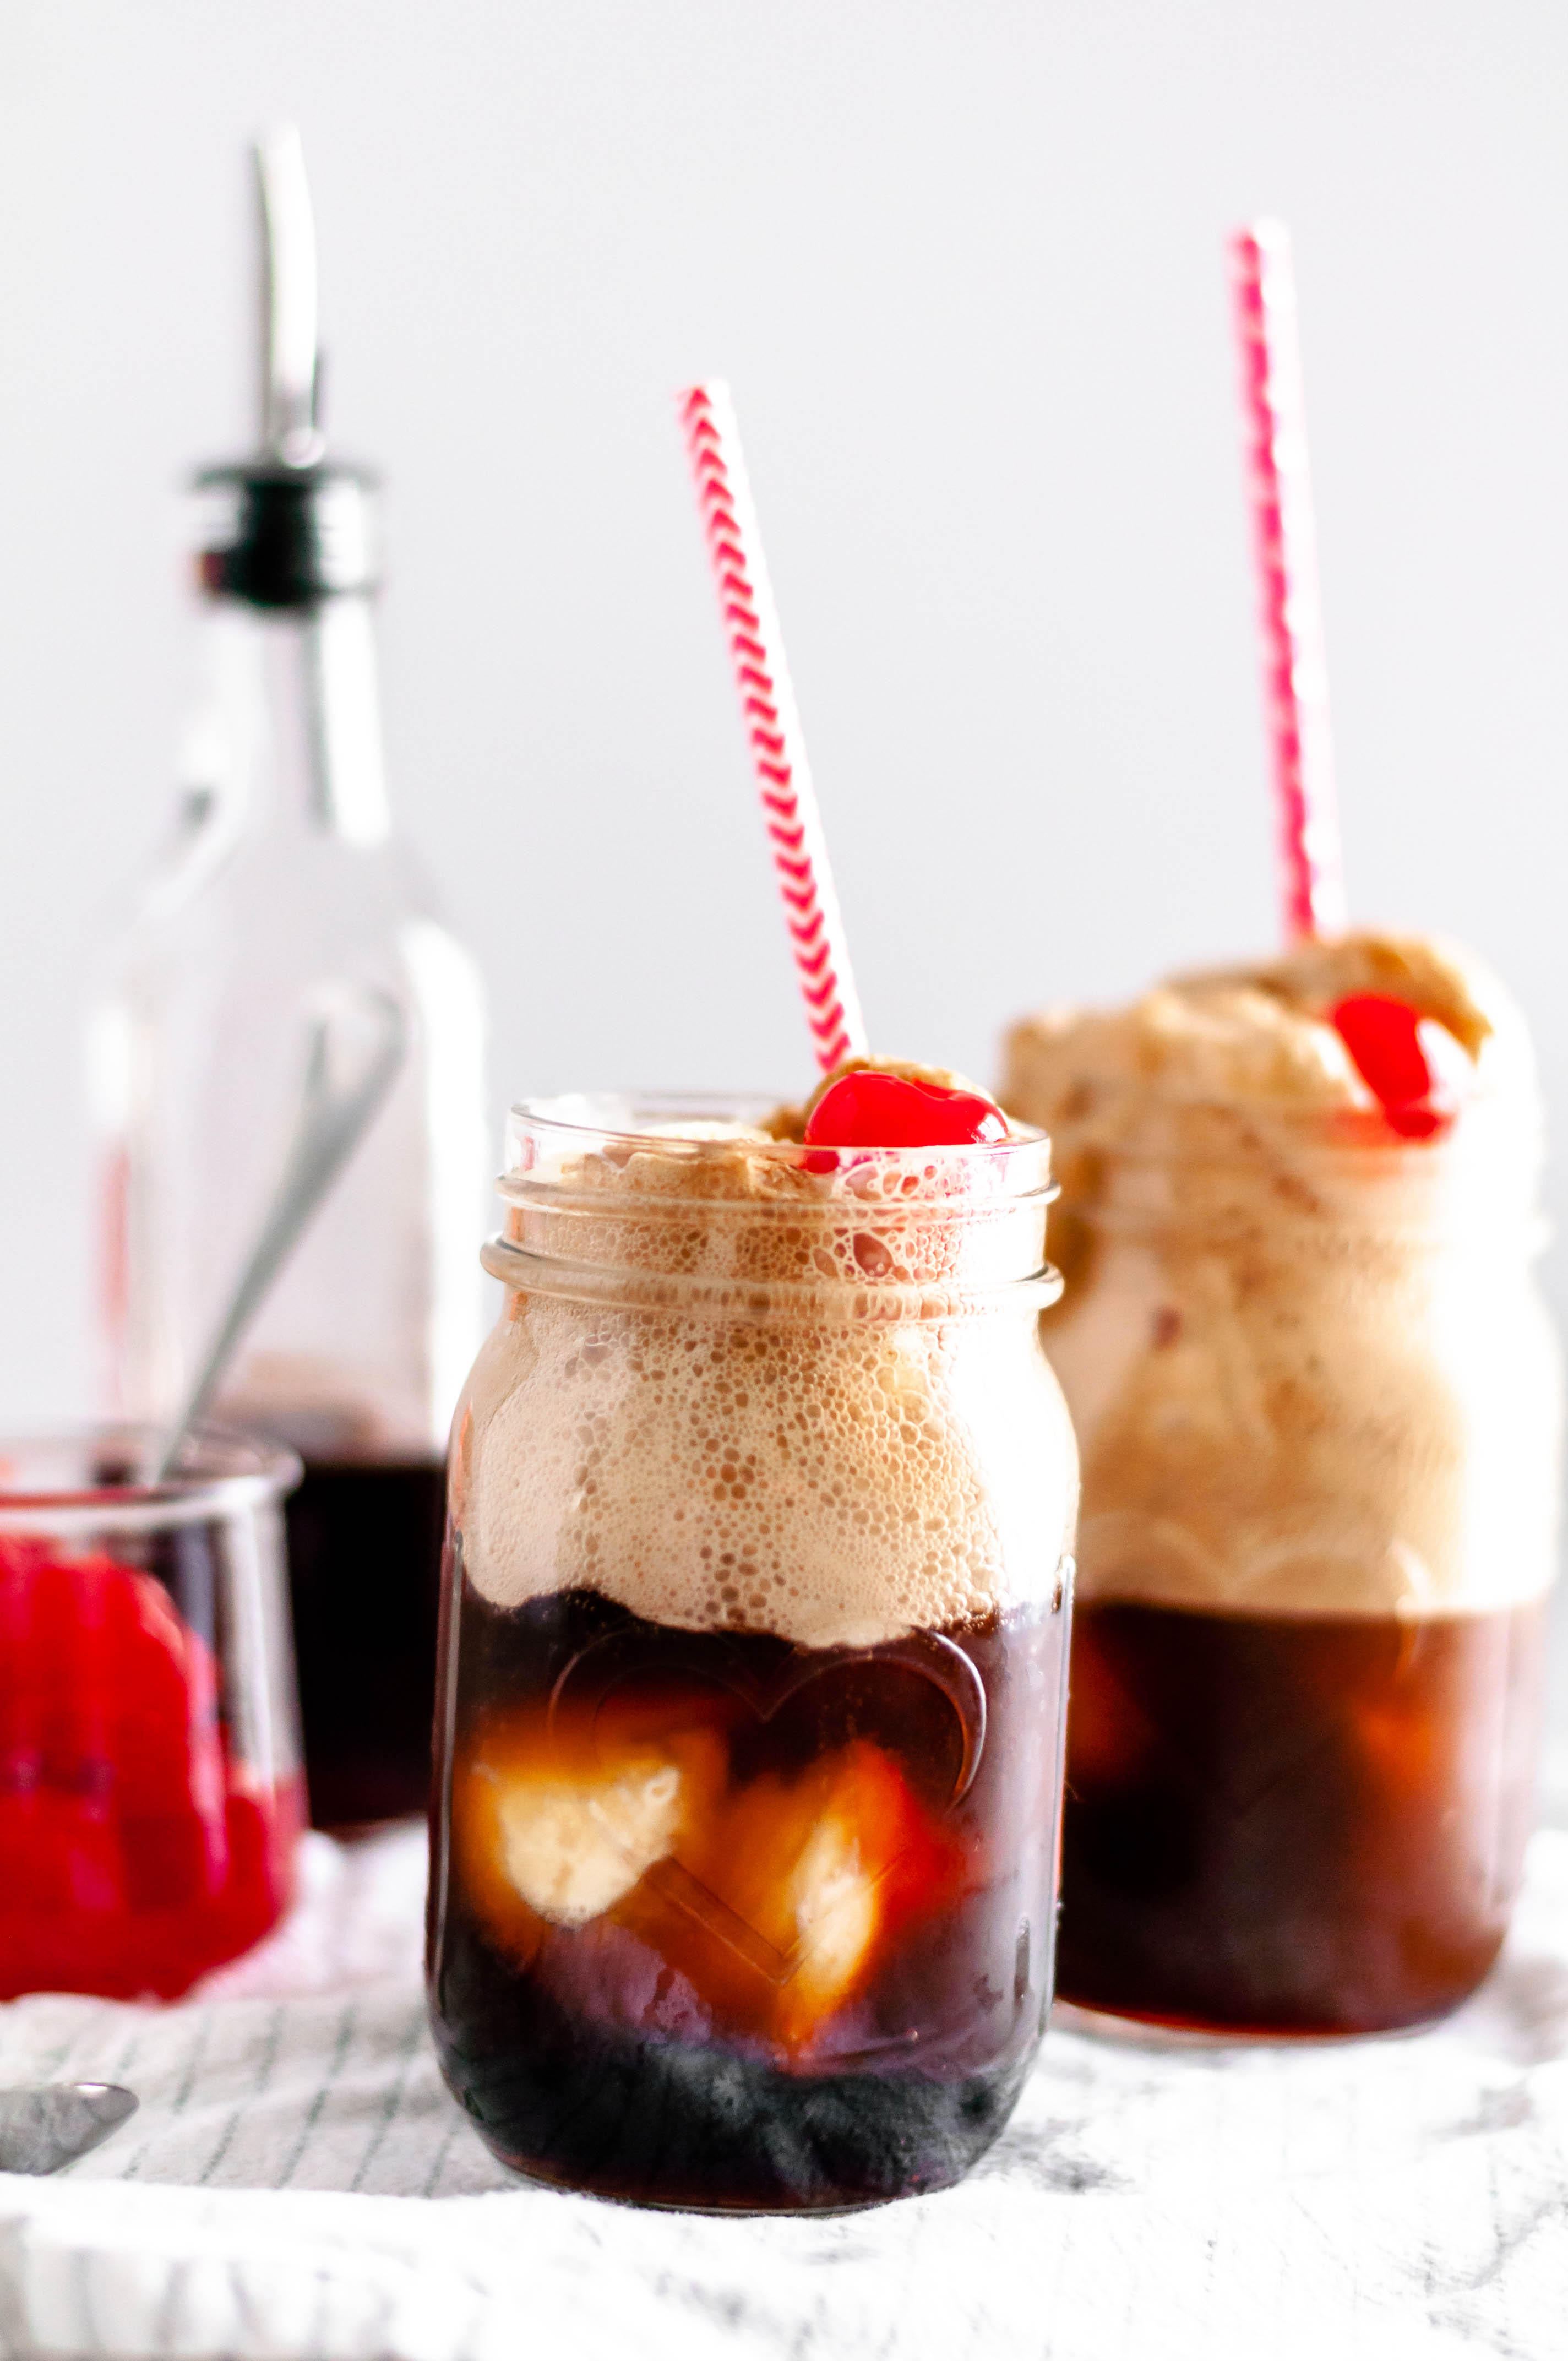 These Cherry Vanilla Coke Floats will make the sweetest dessert this Valentines day. Homemade cherry vanilla syrup, vanilla ice cream and coke.